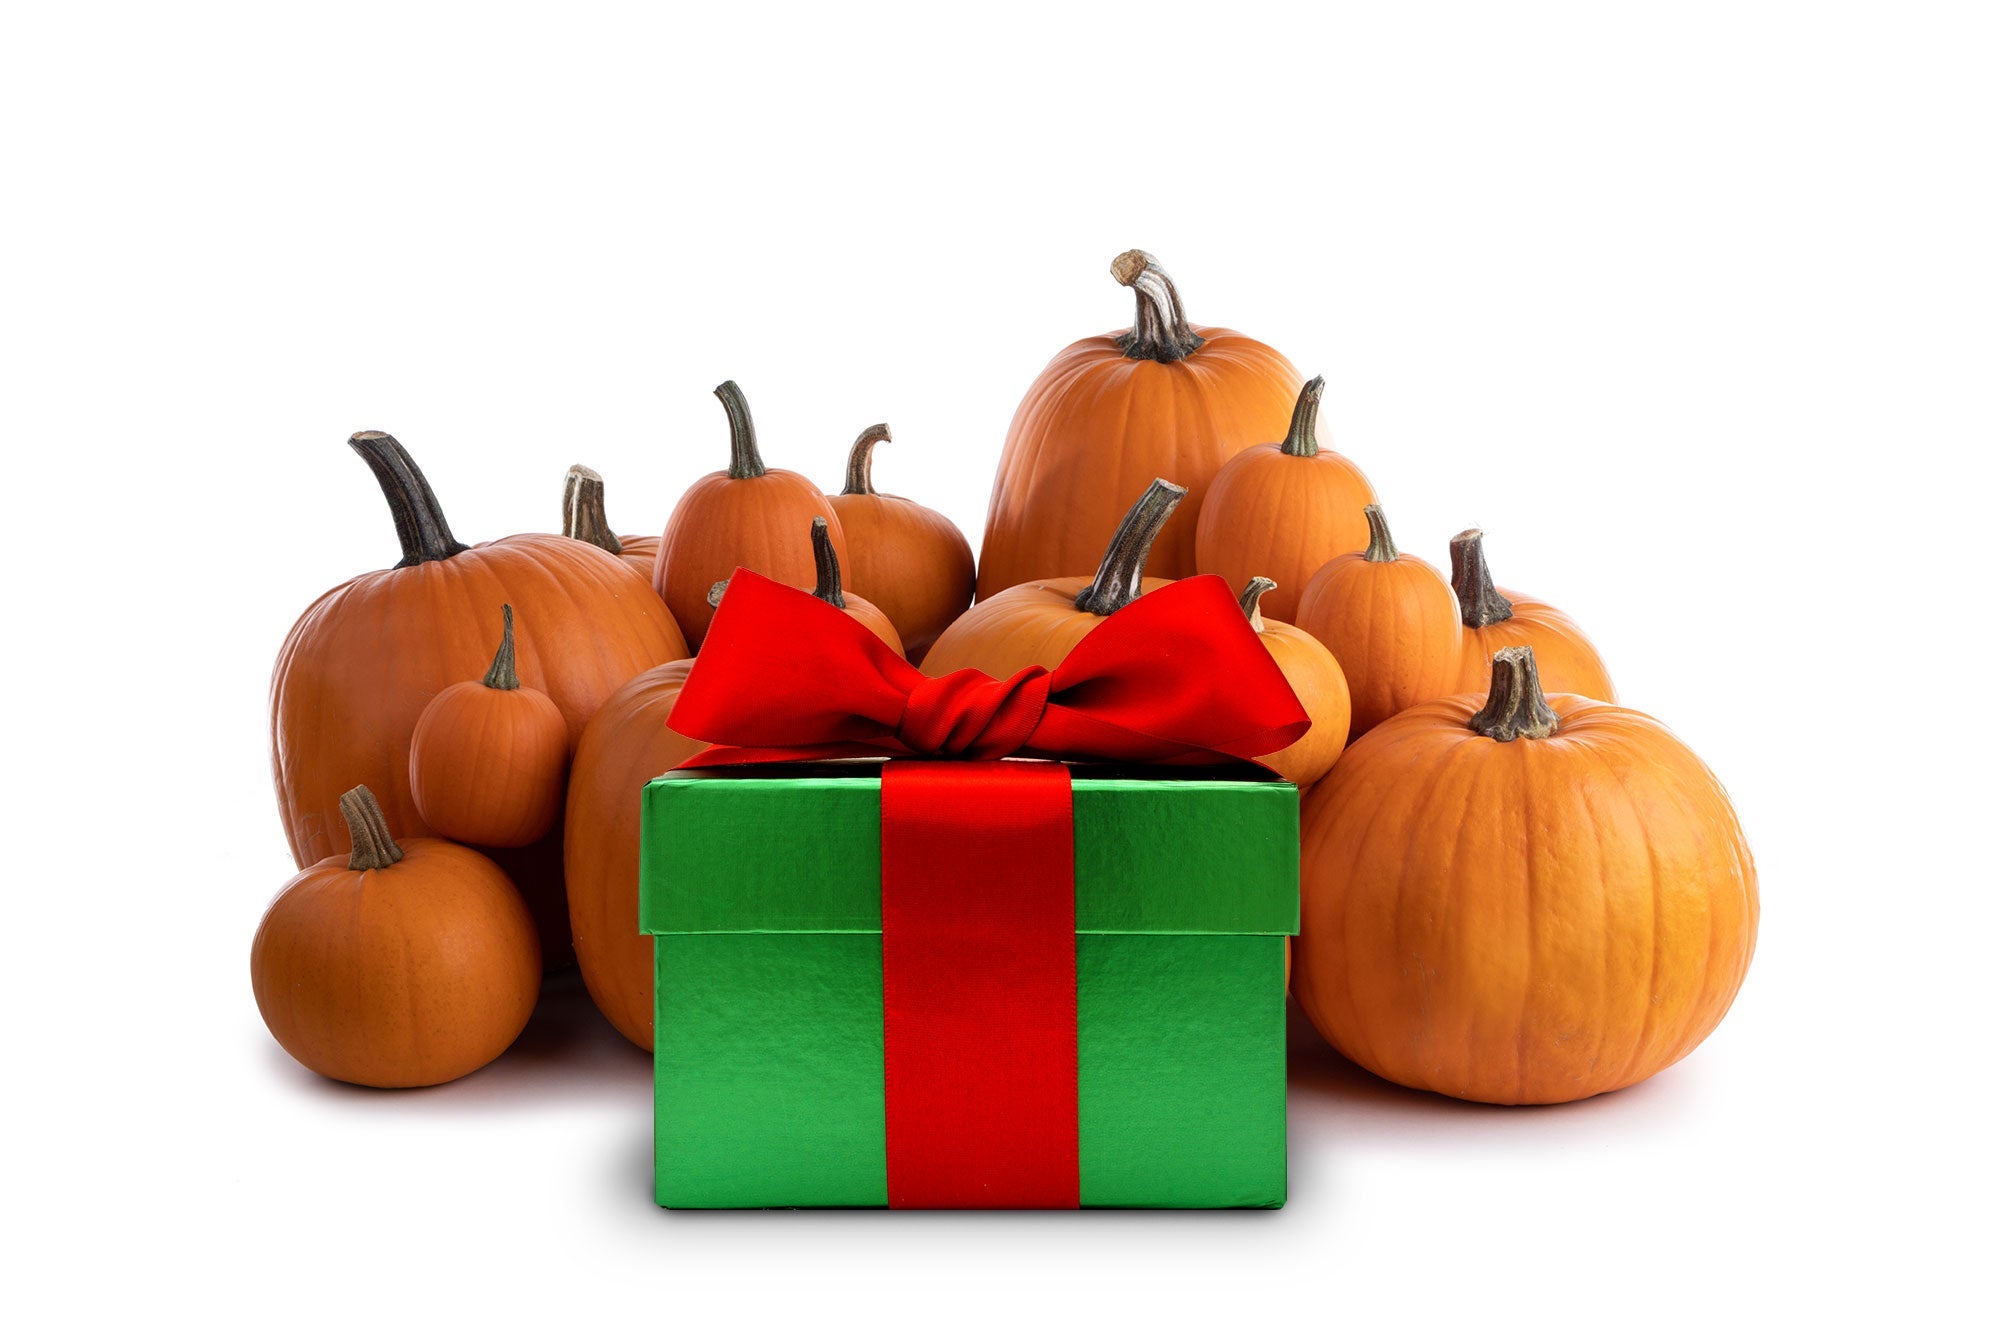 A Christmas gift surrounded by pumpkins.